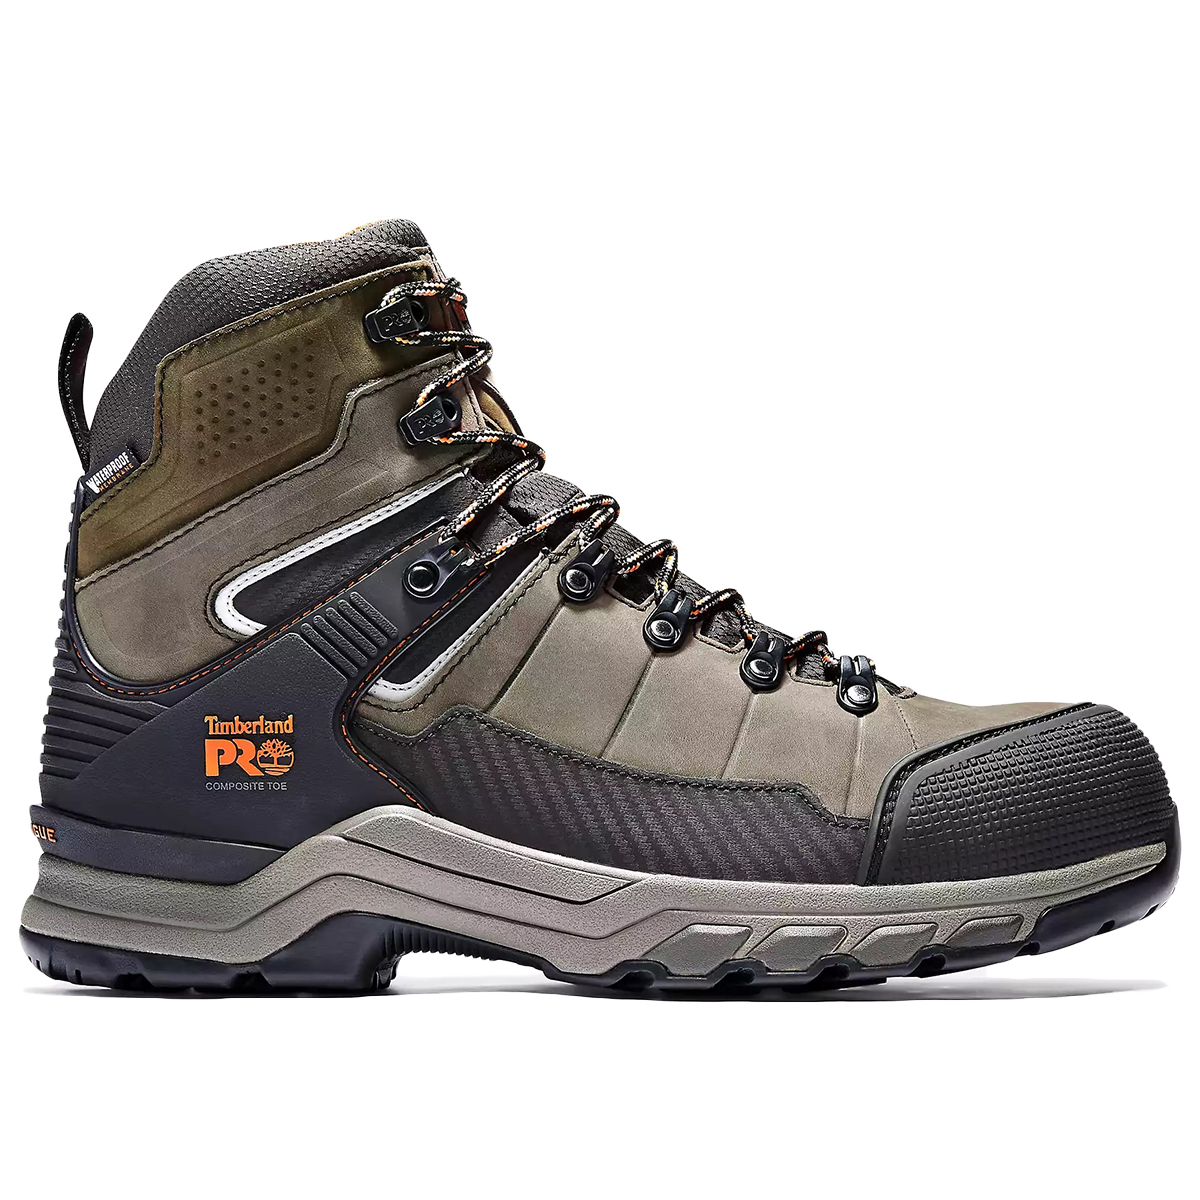 Timberland Pro Men's A25Gp 6" Hypercharge Comp Toe Waterproof Work Boots, Wide